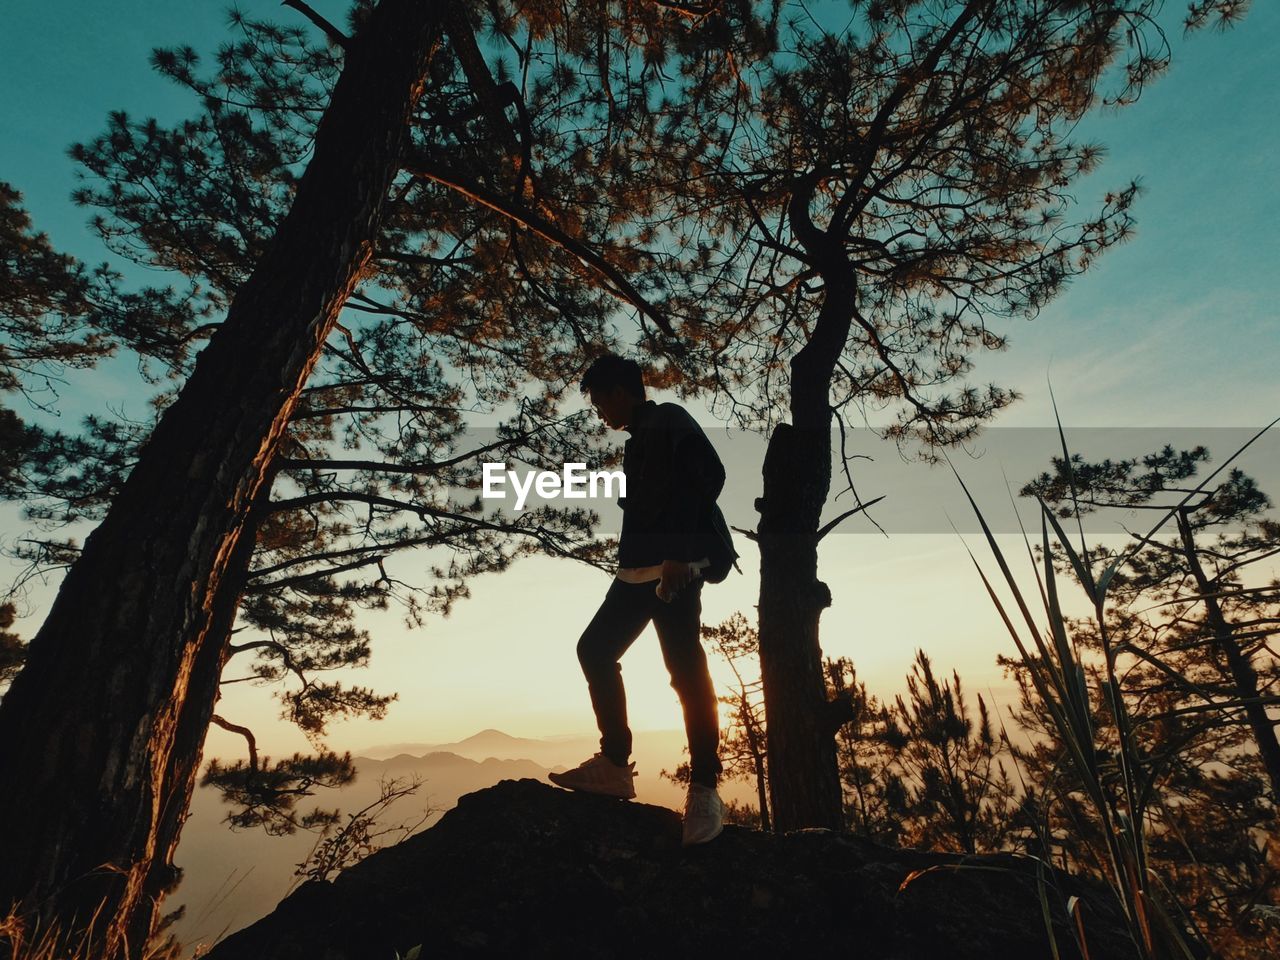 tree, sky, one person, sunset, silhouette, plant, nature, full length, men, adult, leisure activity, sunlight, lifestyles, standing, activity, land, beauty in nature, person, outdoors, adventure, mountain, scenics - nature, evening, sports, landscape, back lit, hiking, side view